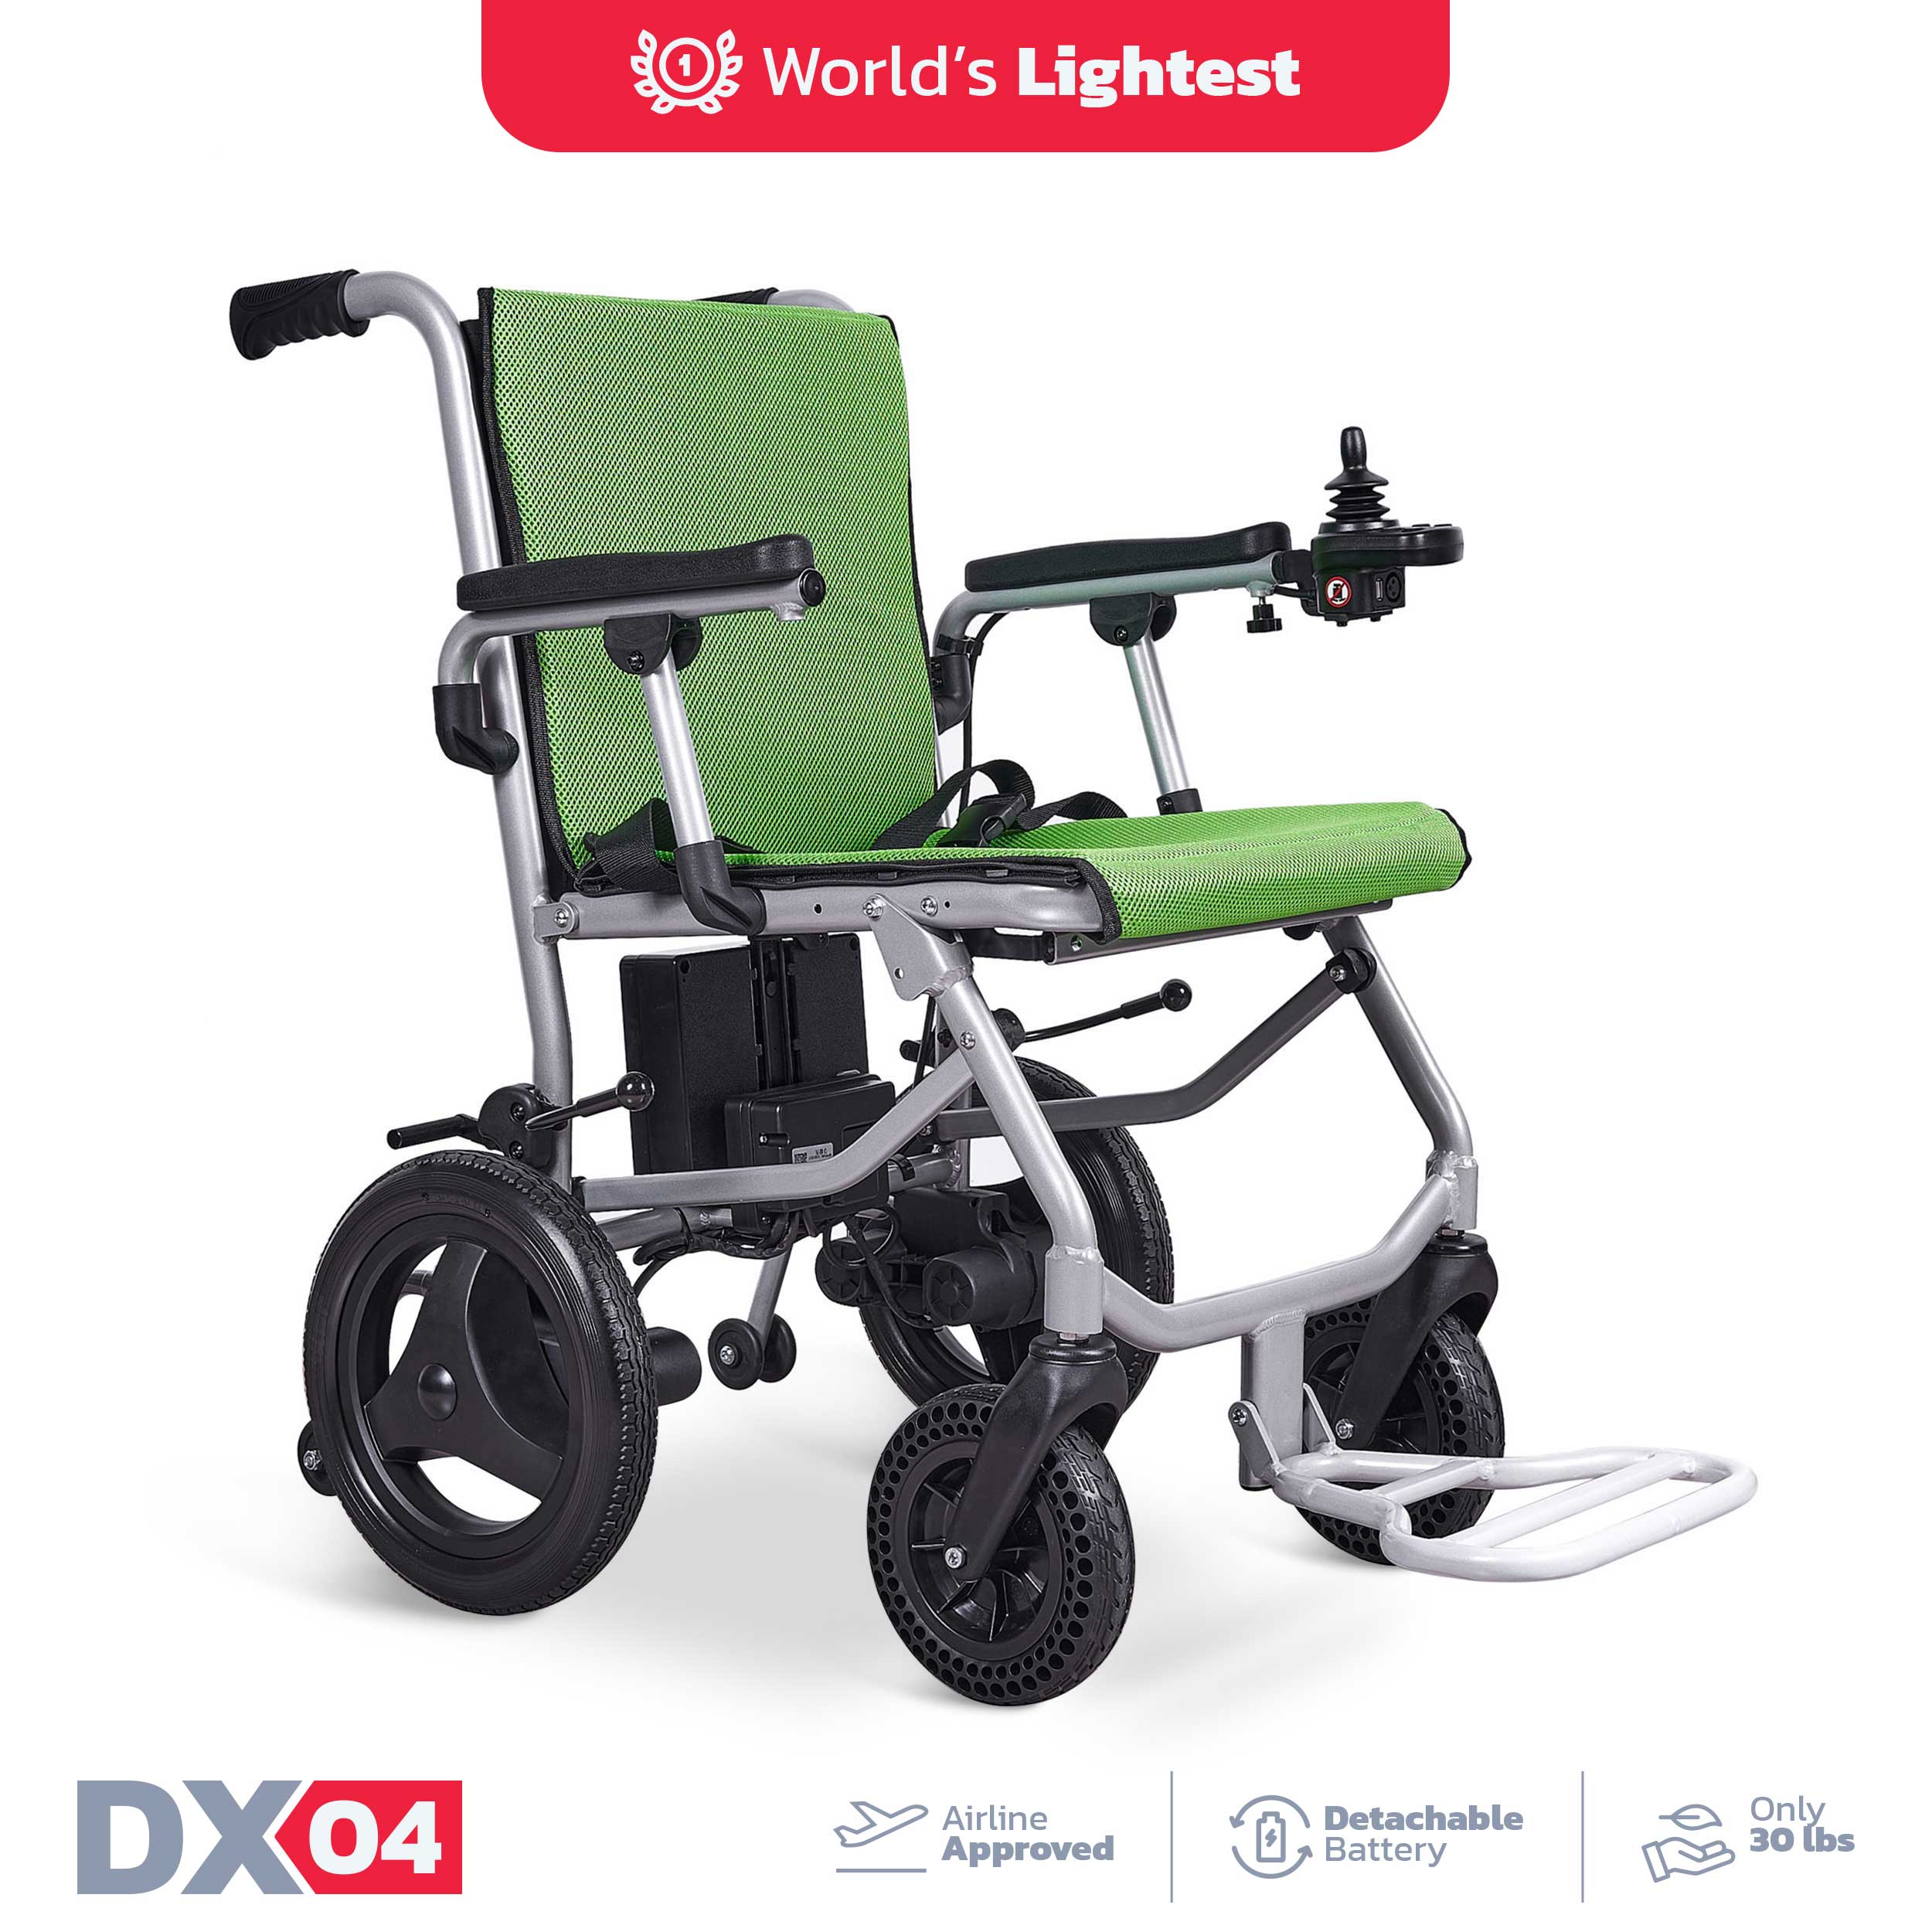 Rubicon DX04 - The Lightest Electric Wheelchair